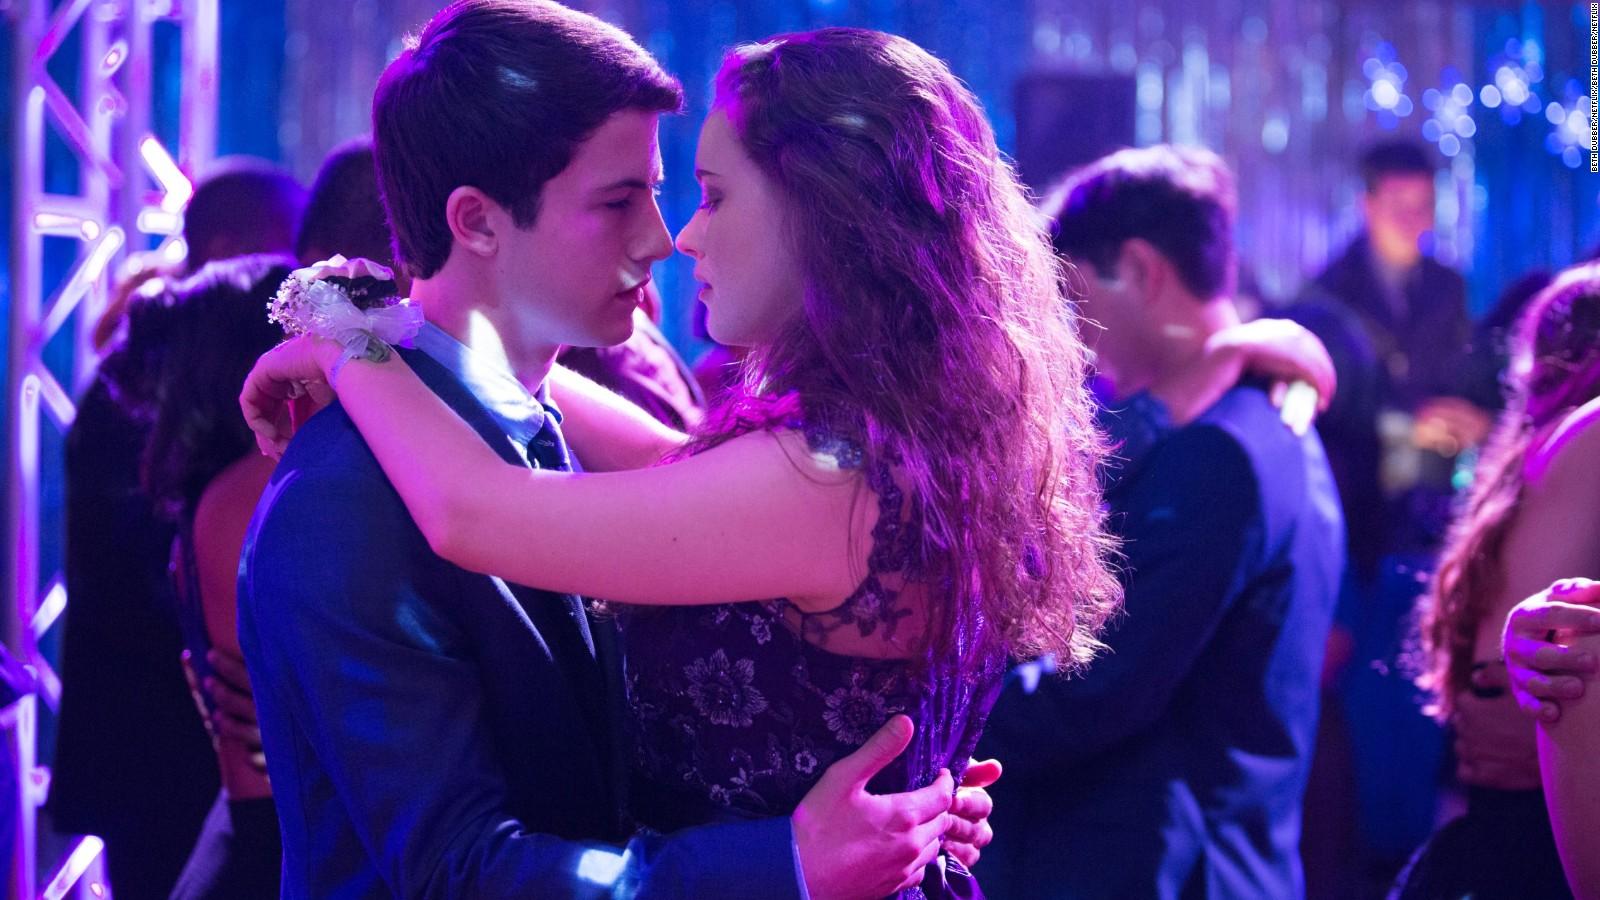 '13 Reasons Why' adds warning video to series